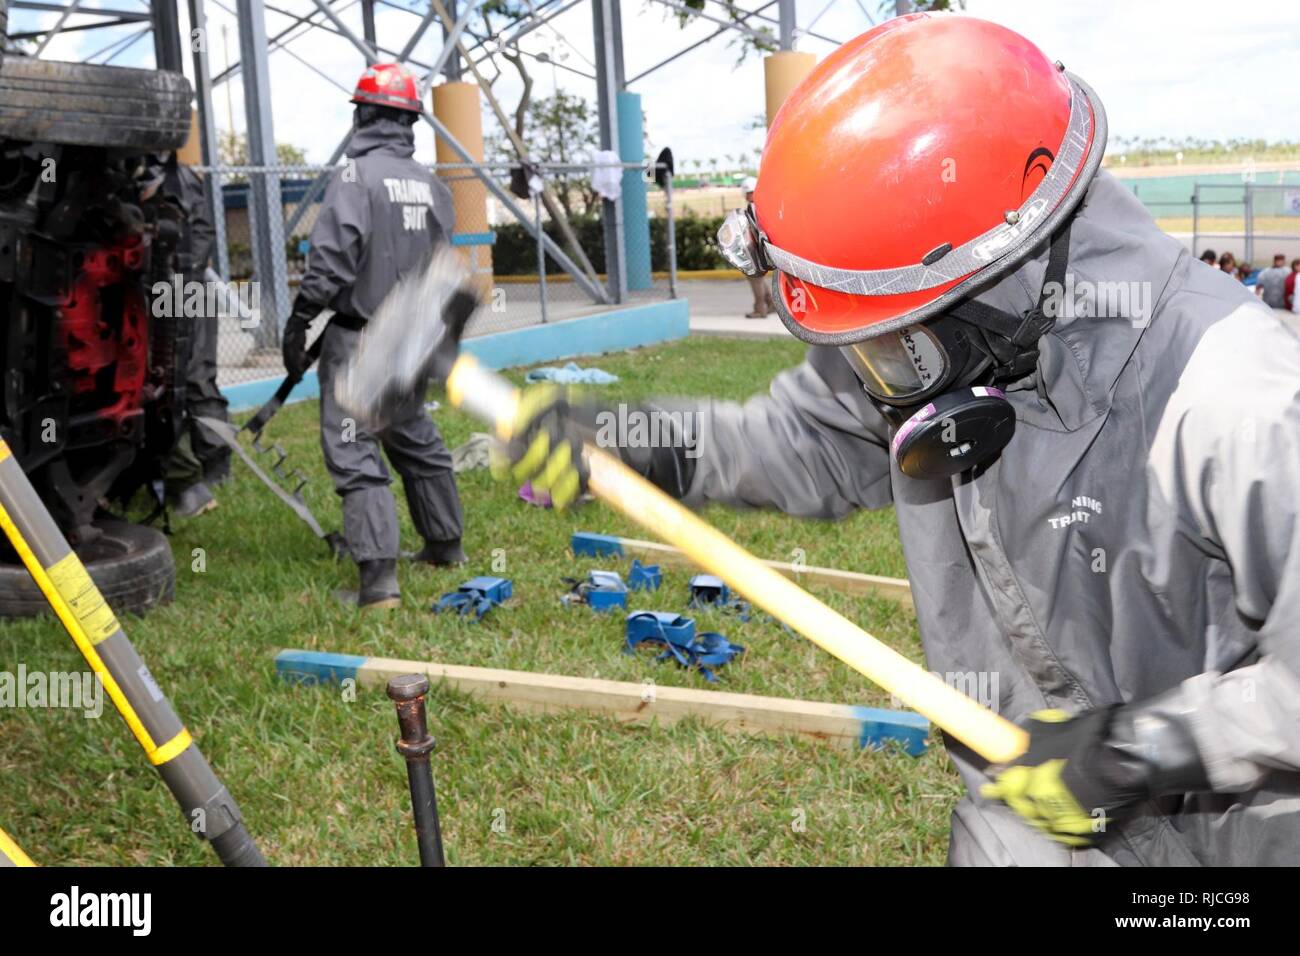 A Soldier of the 414th Chemical Company fro Orangeburg, South Carolina hammers in a support rod during a Joint Training Exercise hosted by the Homestead-Miami Speedway and Miami-Dade Fire Department in Miami, Florida. Jan. 11, 2018. This JTE focused on building response capabilities and the seamless transition between the local first responders and the follow-on support provided by the National Guard and Active duty soldiers. (U. S. Army Stock Photo